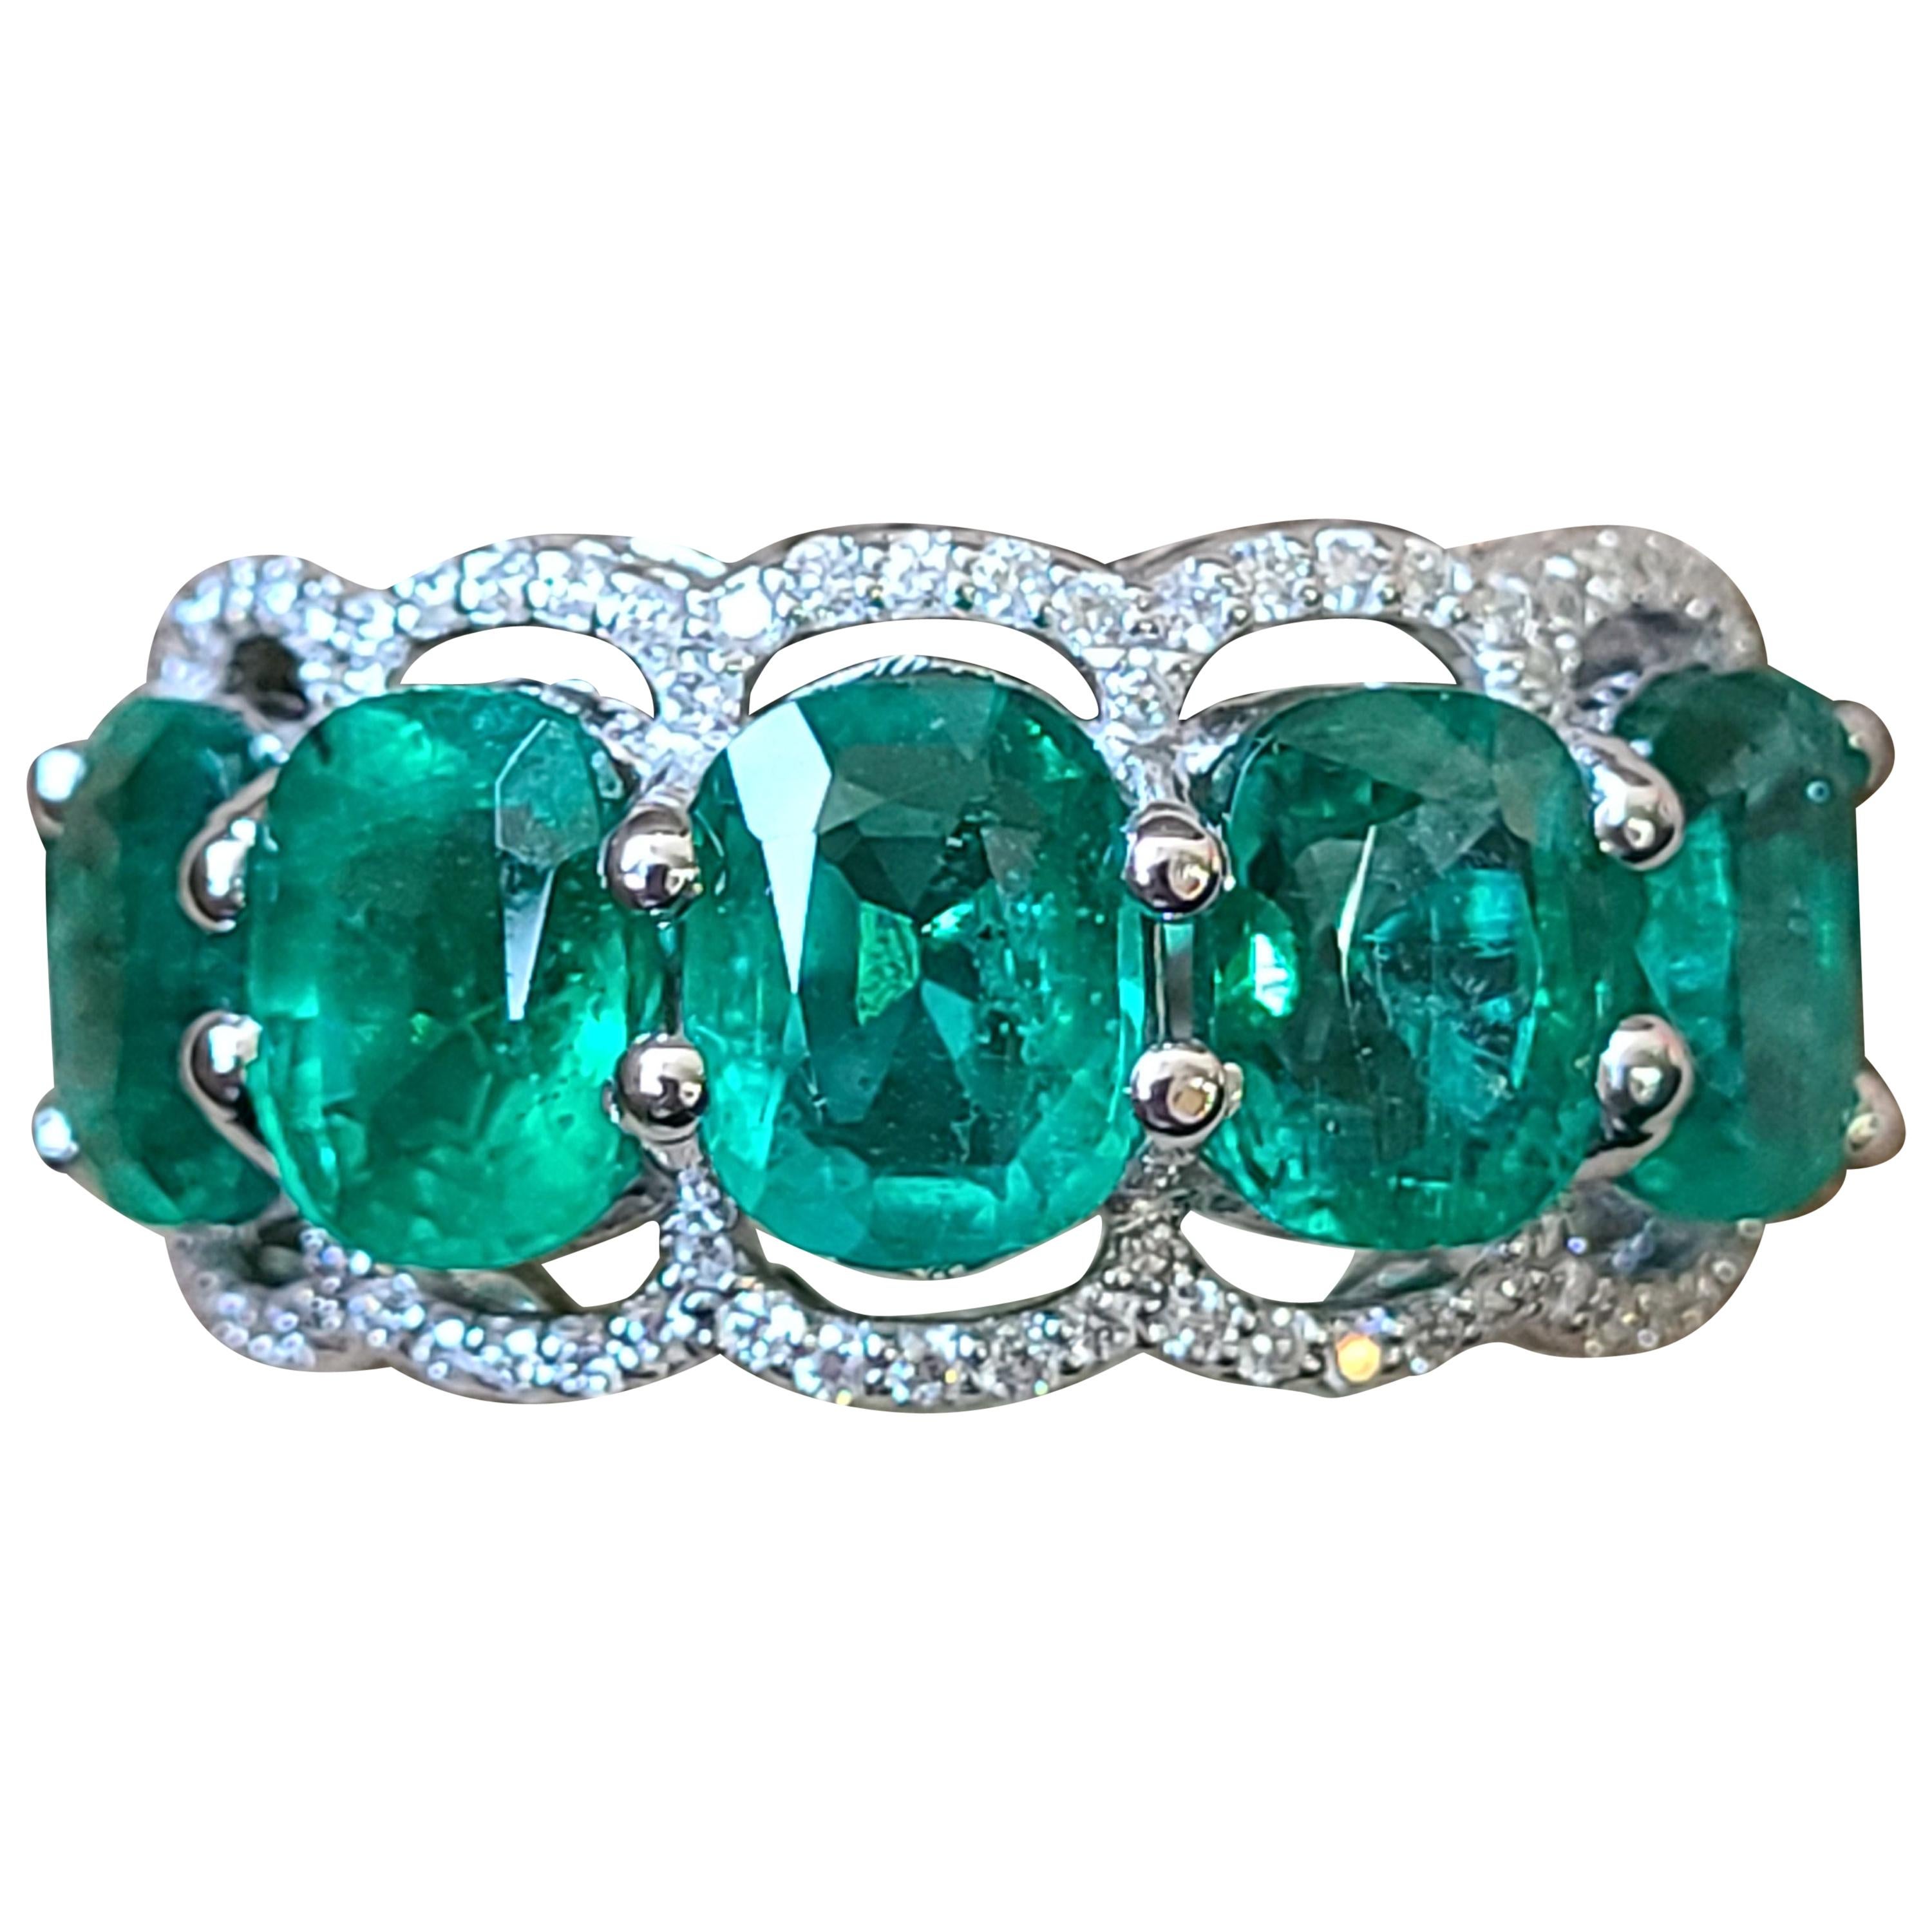 A modern and chic 5 piece natural emerald with diamonds set in 18k gold . The Emerald is natural and originates from Zambia. Weight of emerald is 5.28 carats and diamond weight is .30 carats. The ring dimensions in cm 1.1 x 3 x 2.2 (LXWXH) . US size